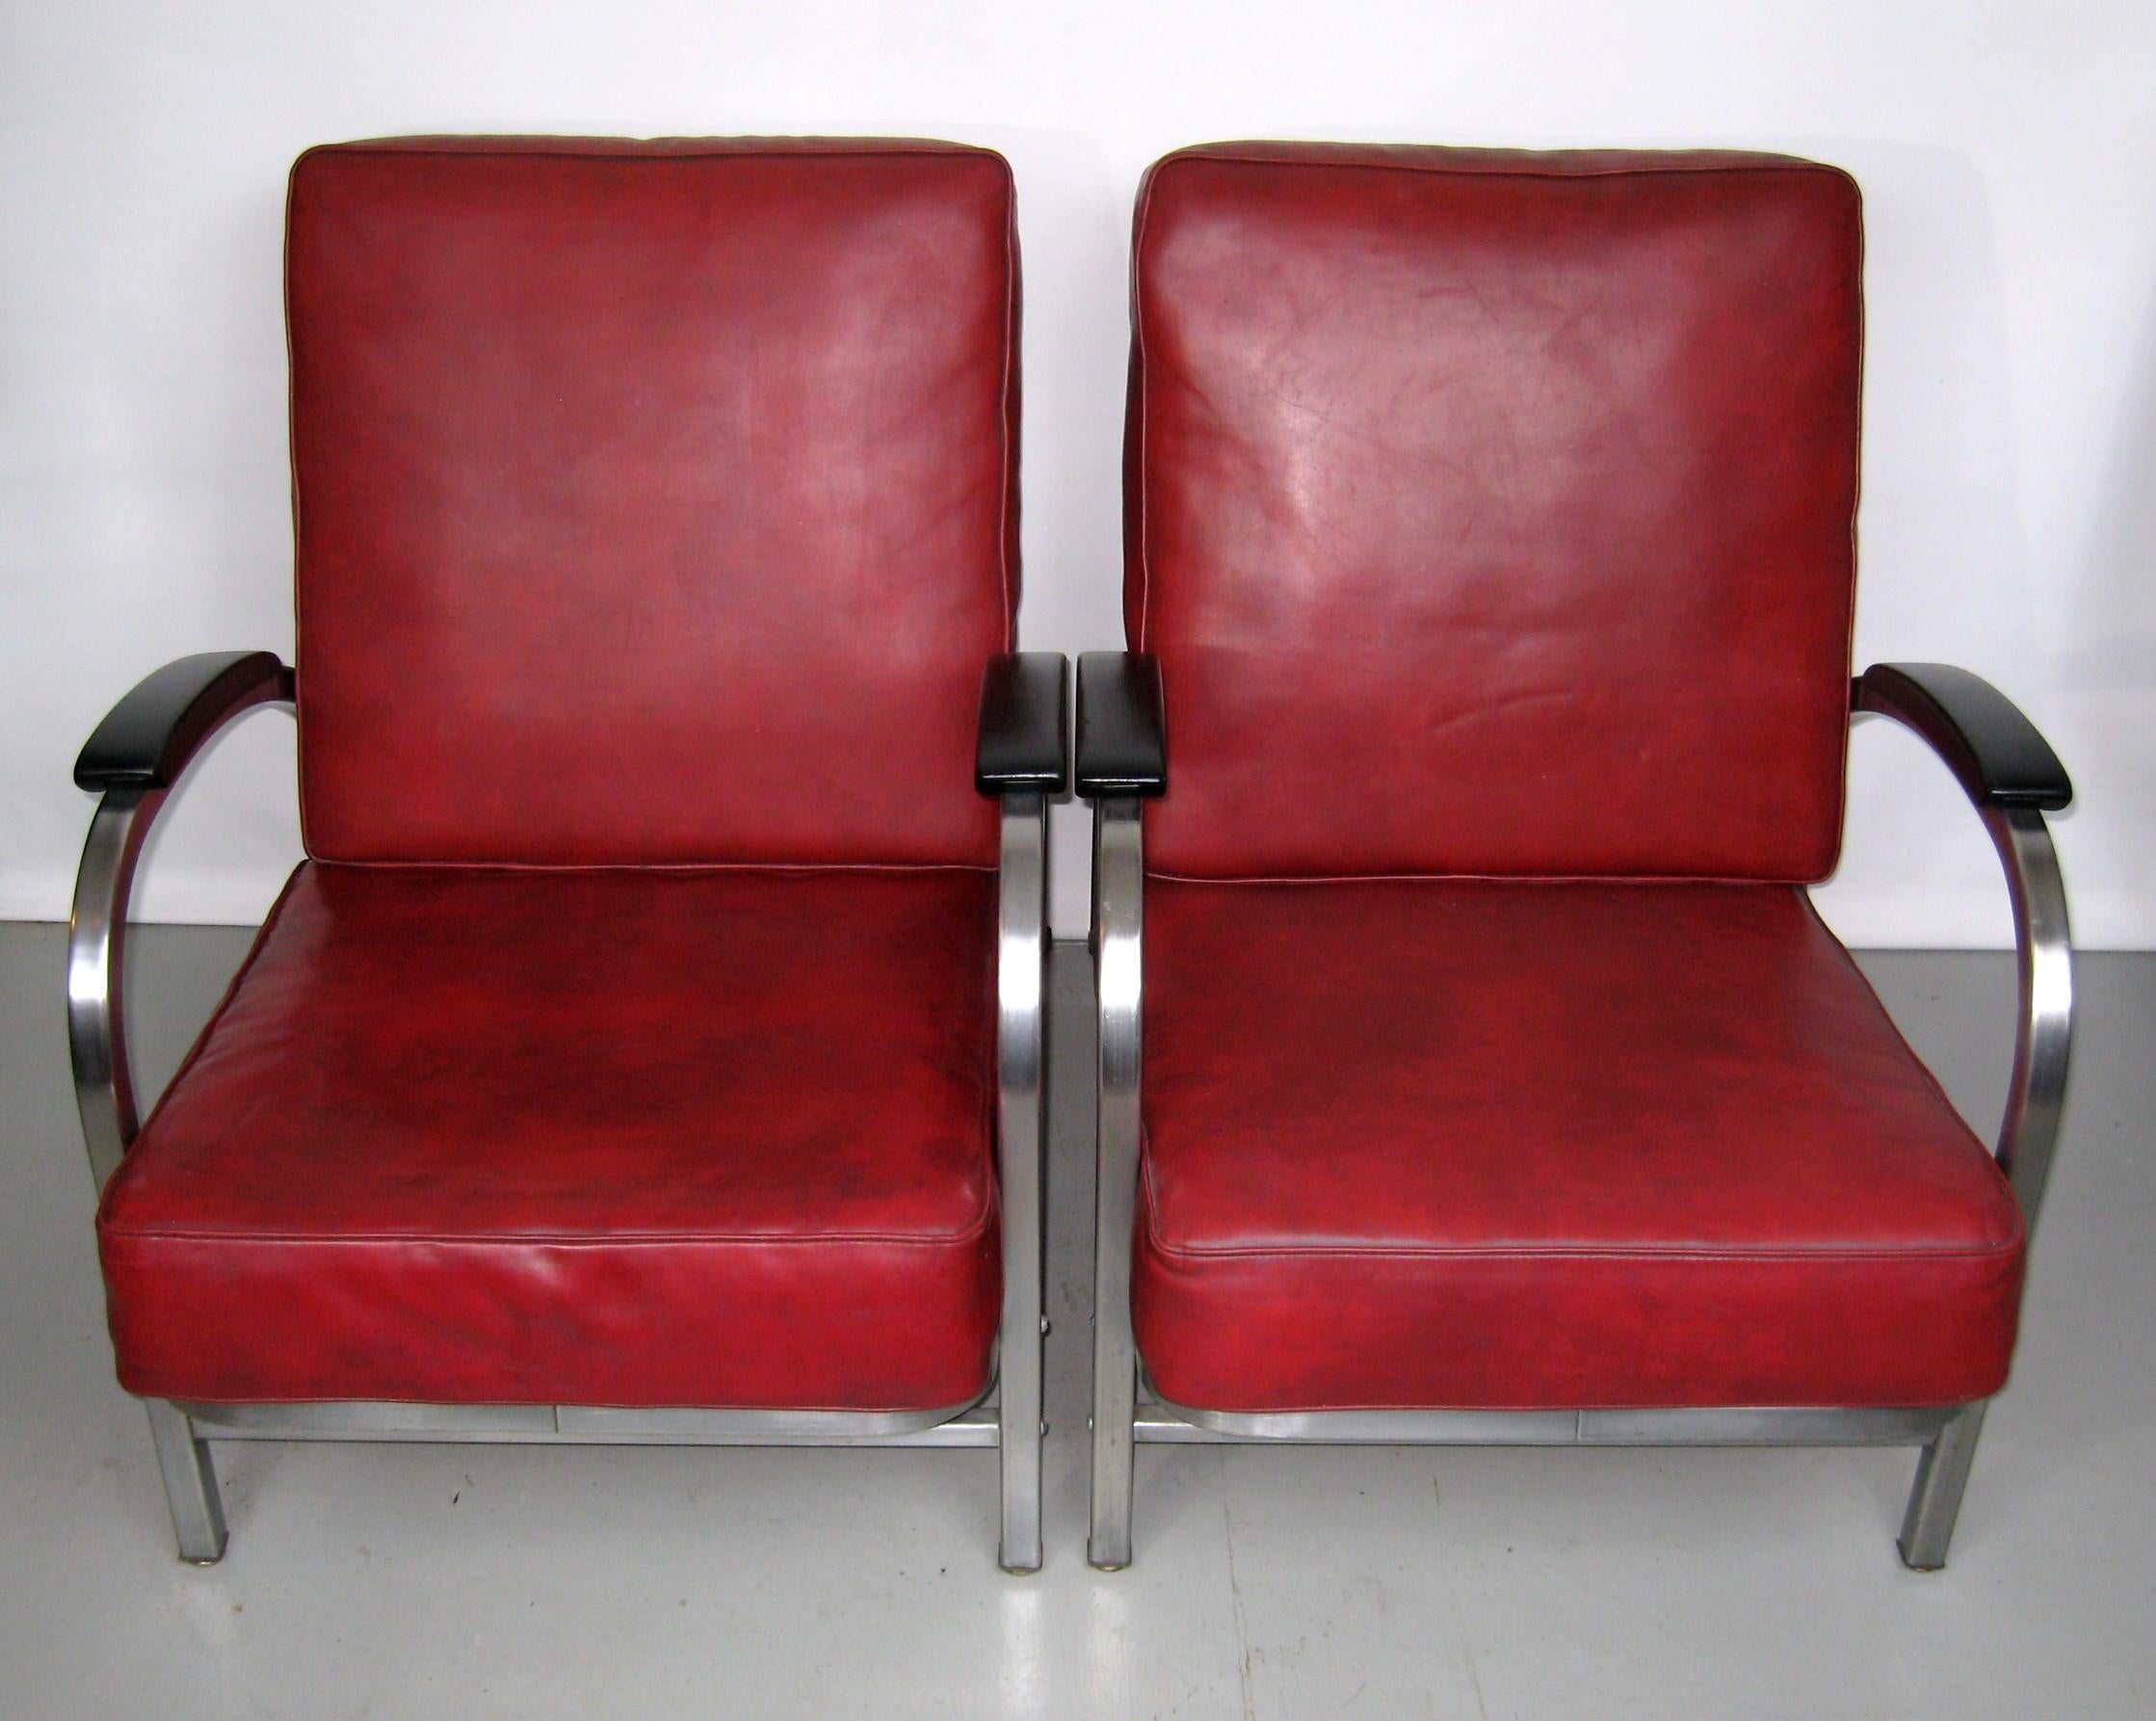 Absolutely extraordinarily well preserved set of tubular club chairs in the style and era of Wolfgang Hoffman, Kem Weber, and Gilbert Rohde. Streamline Art Deco modernism of the 1930s well represented in this set. Original dark red Naugahyde